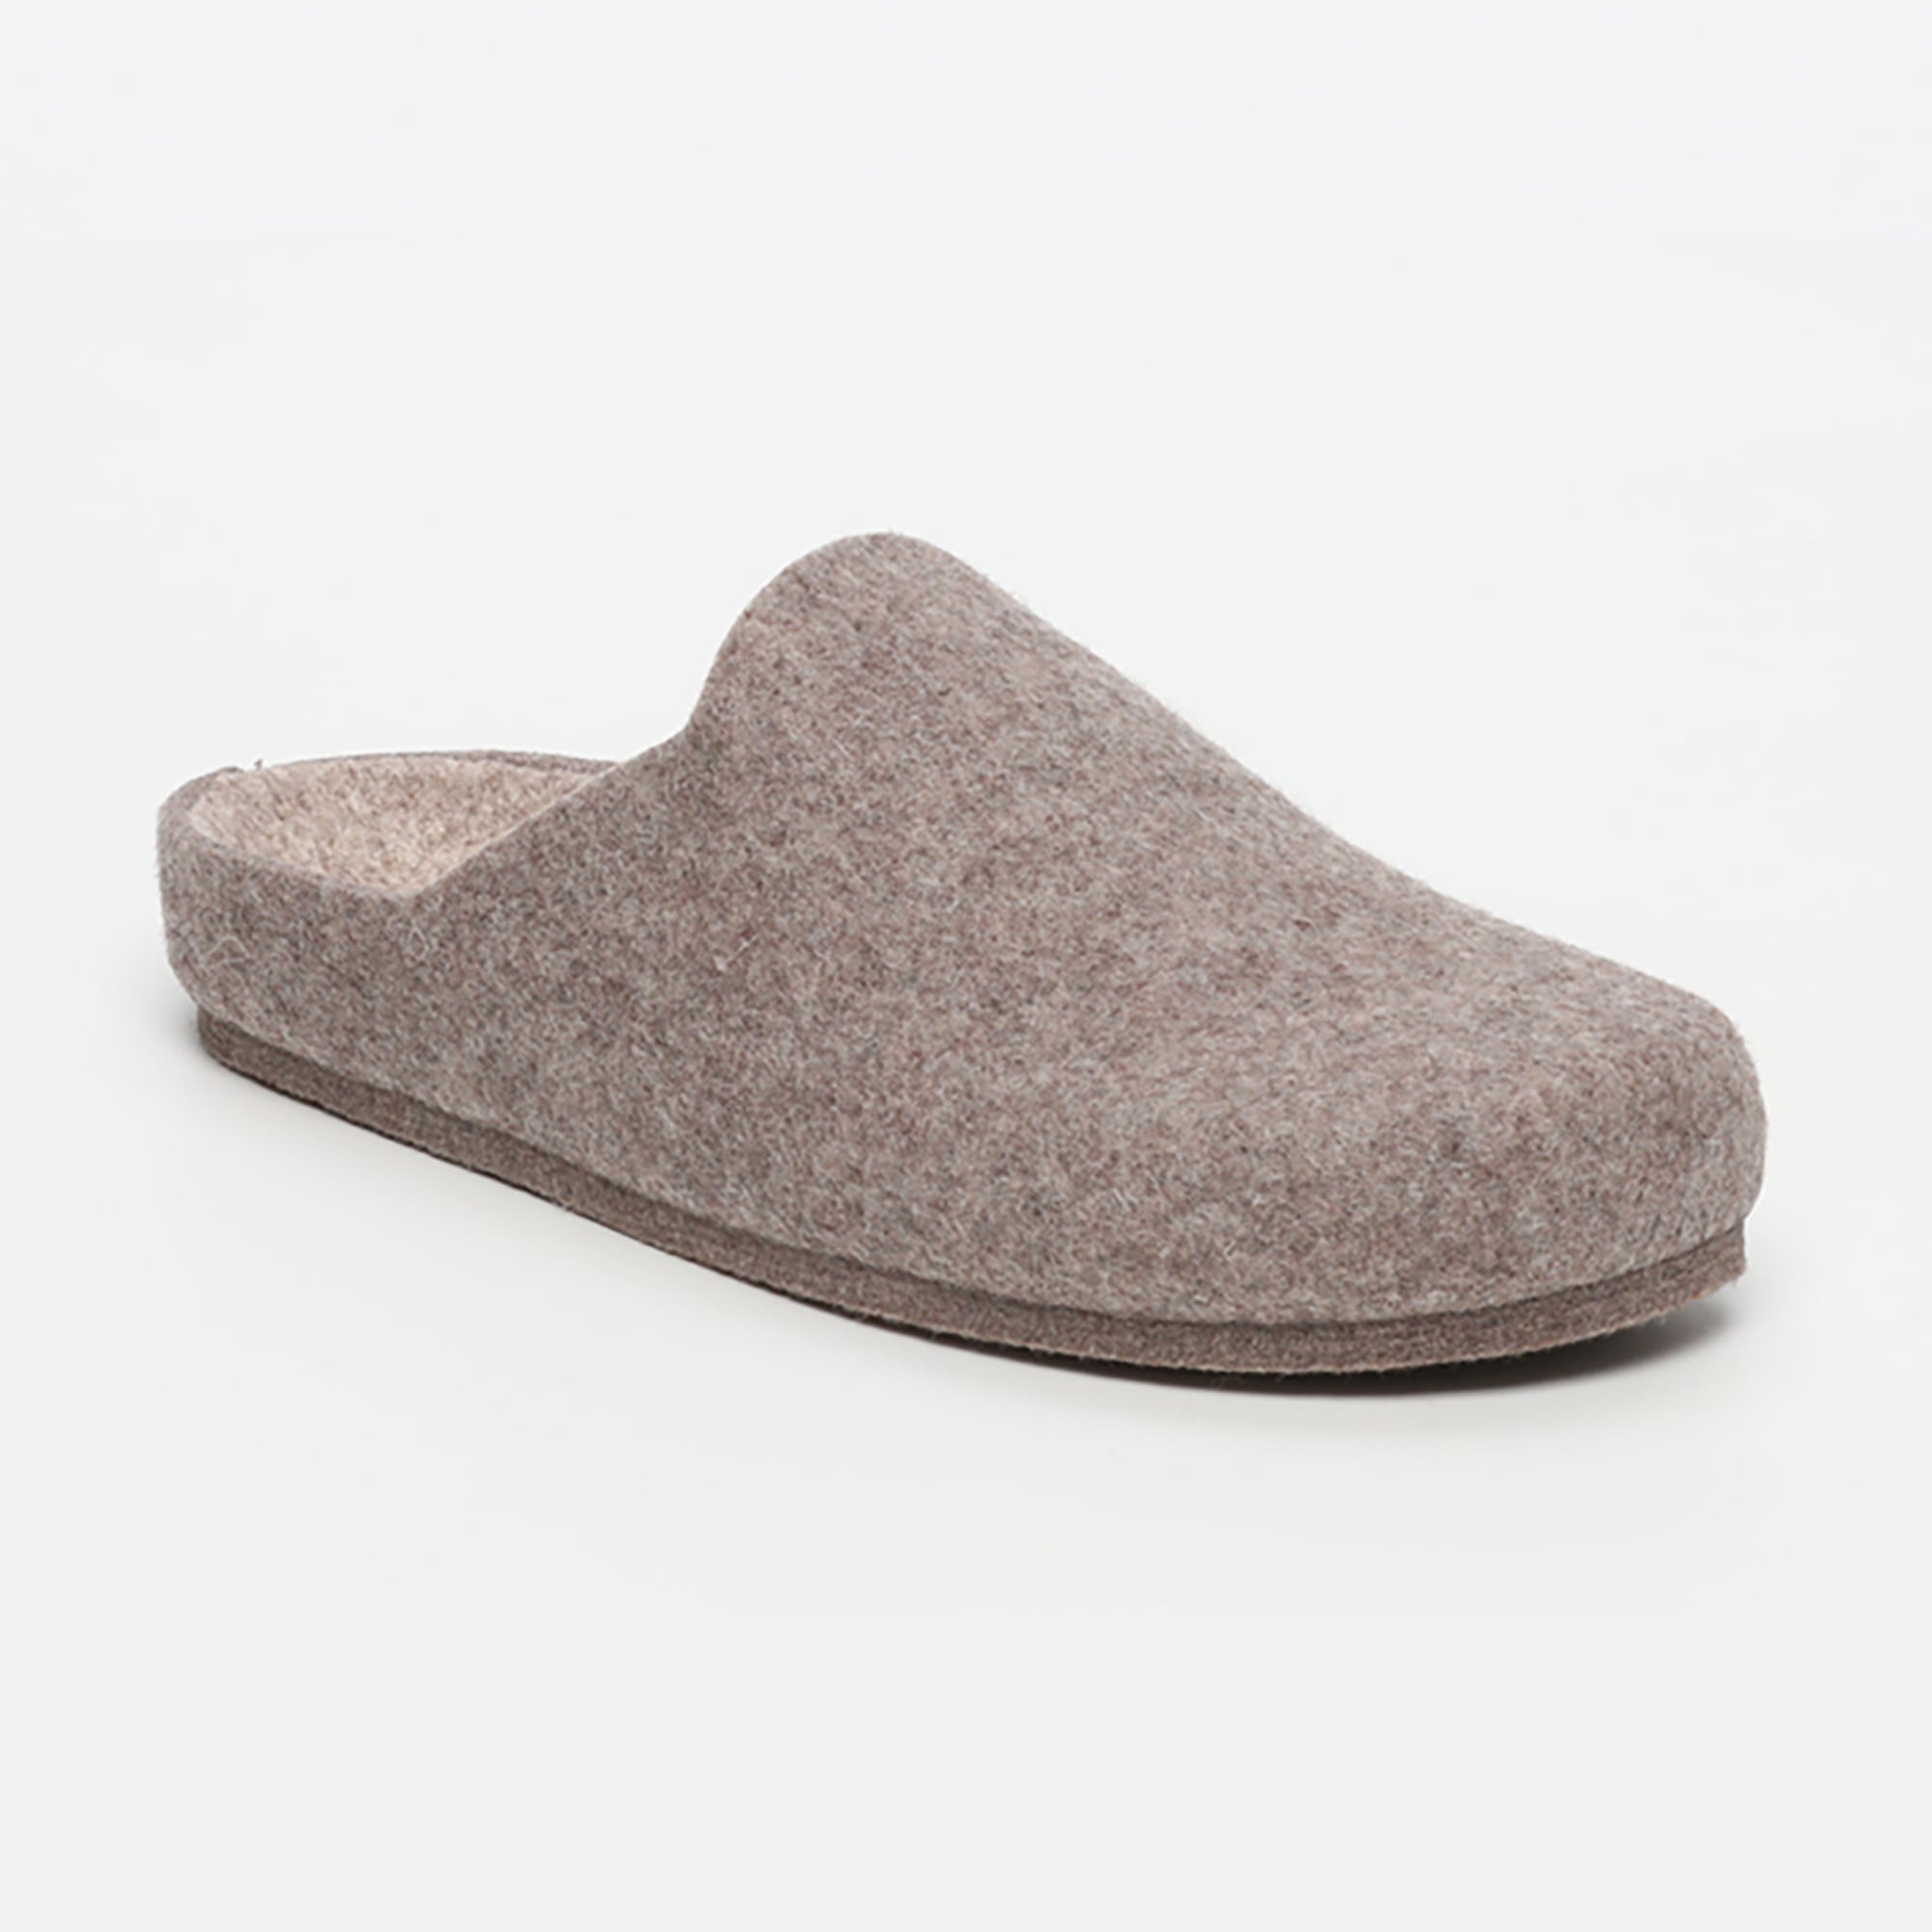 Chaussons mules - La taupe